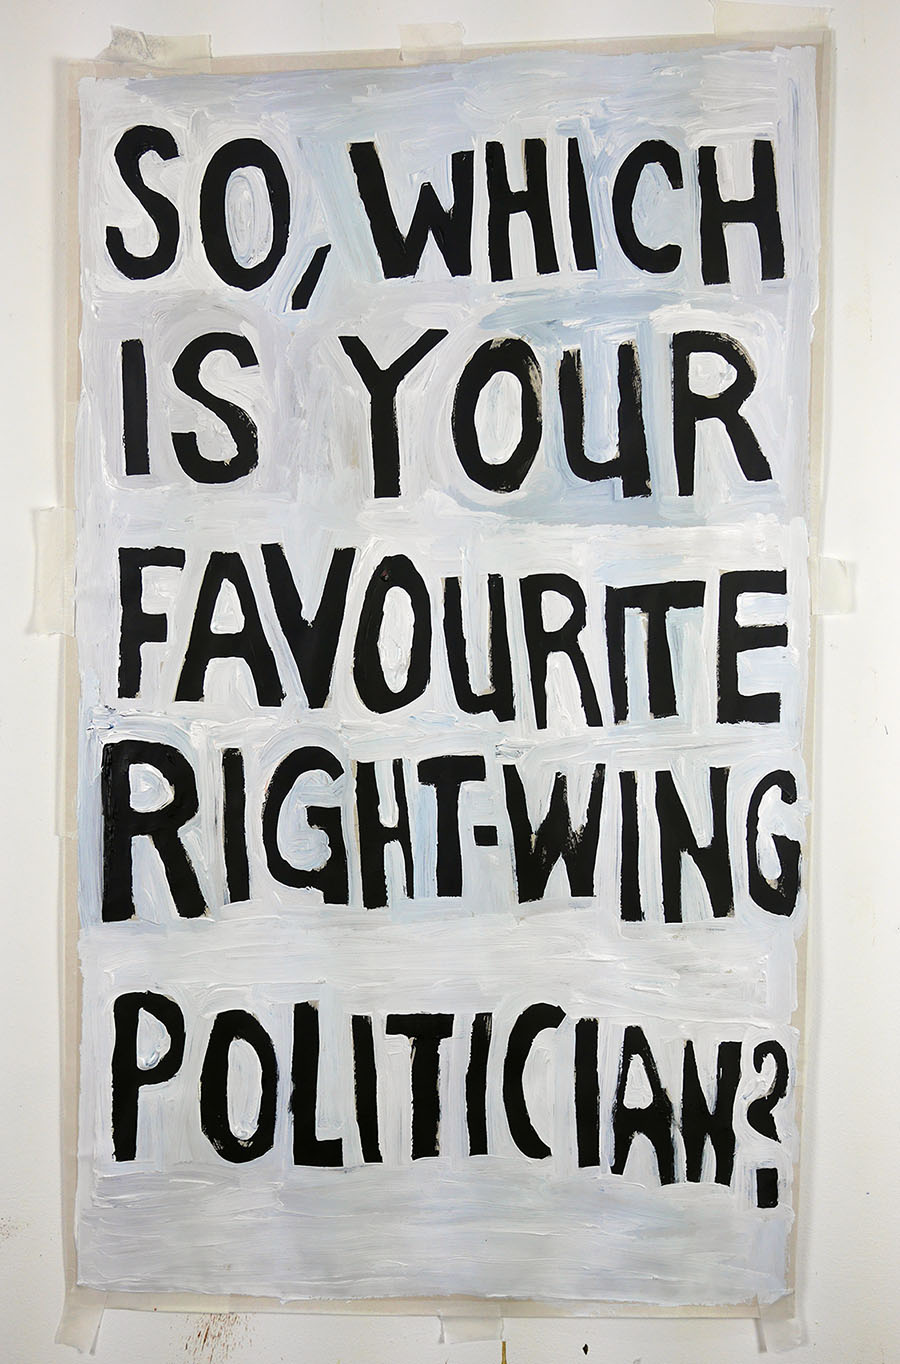 right-wing politician by Jay Rechsteiner